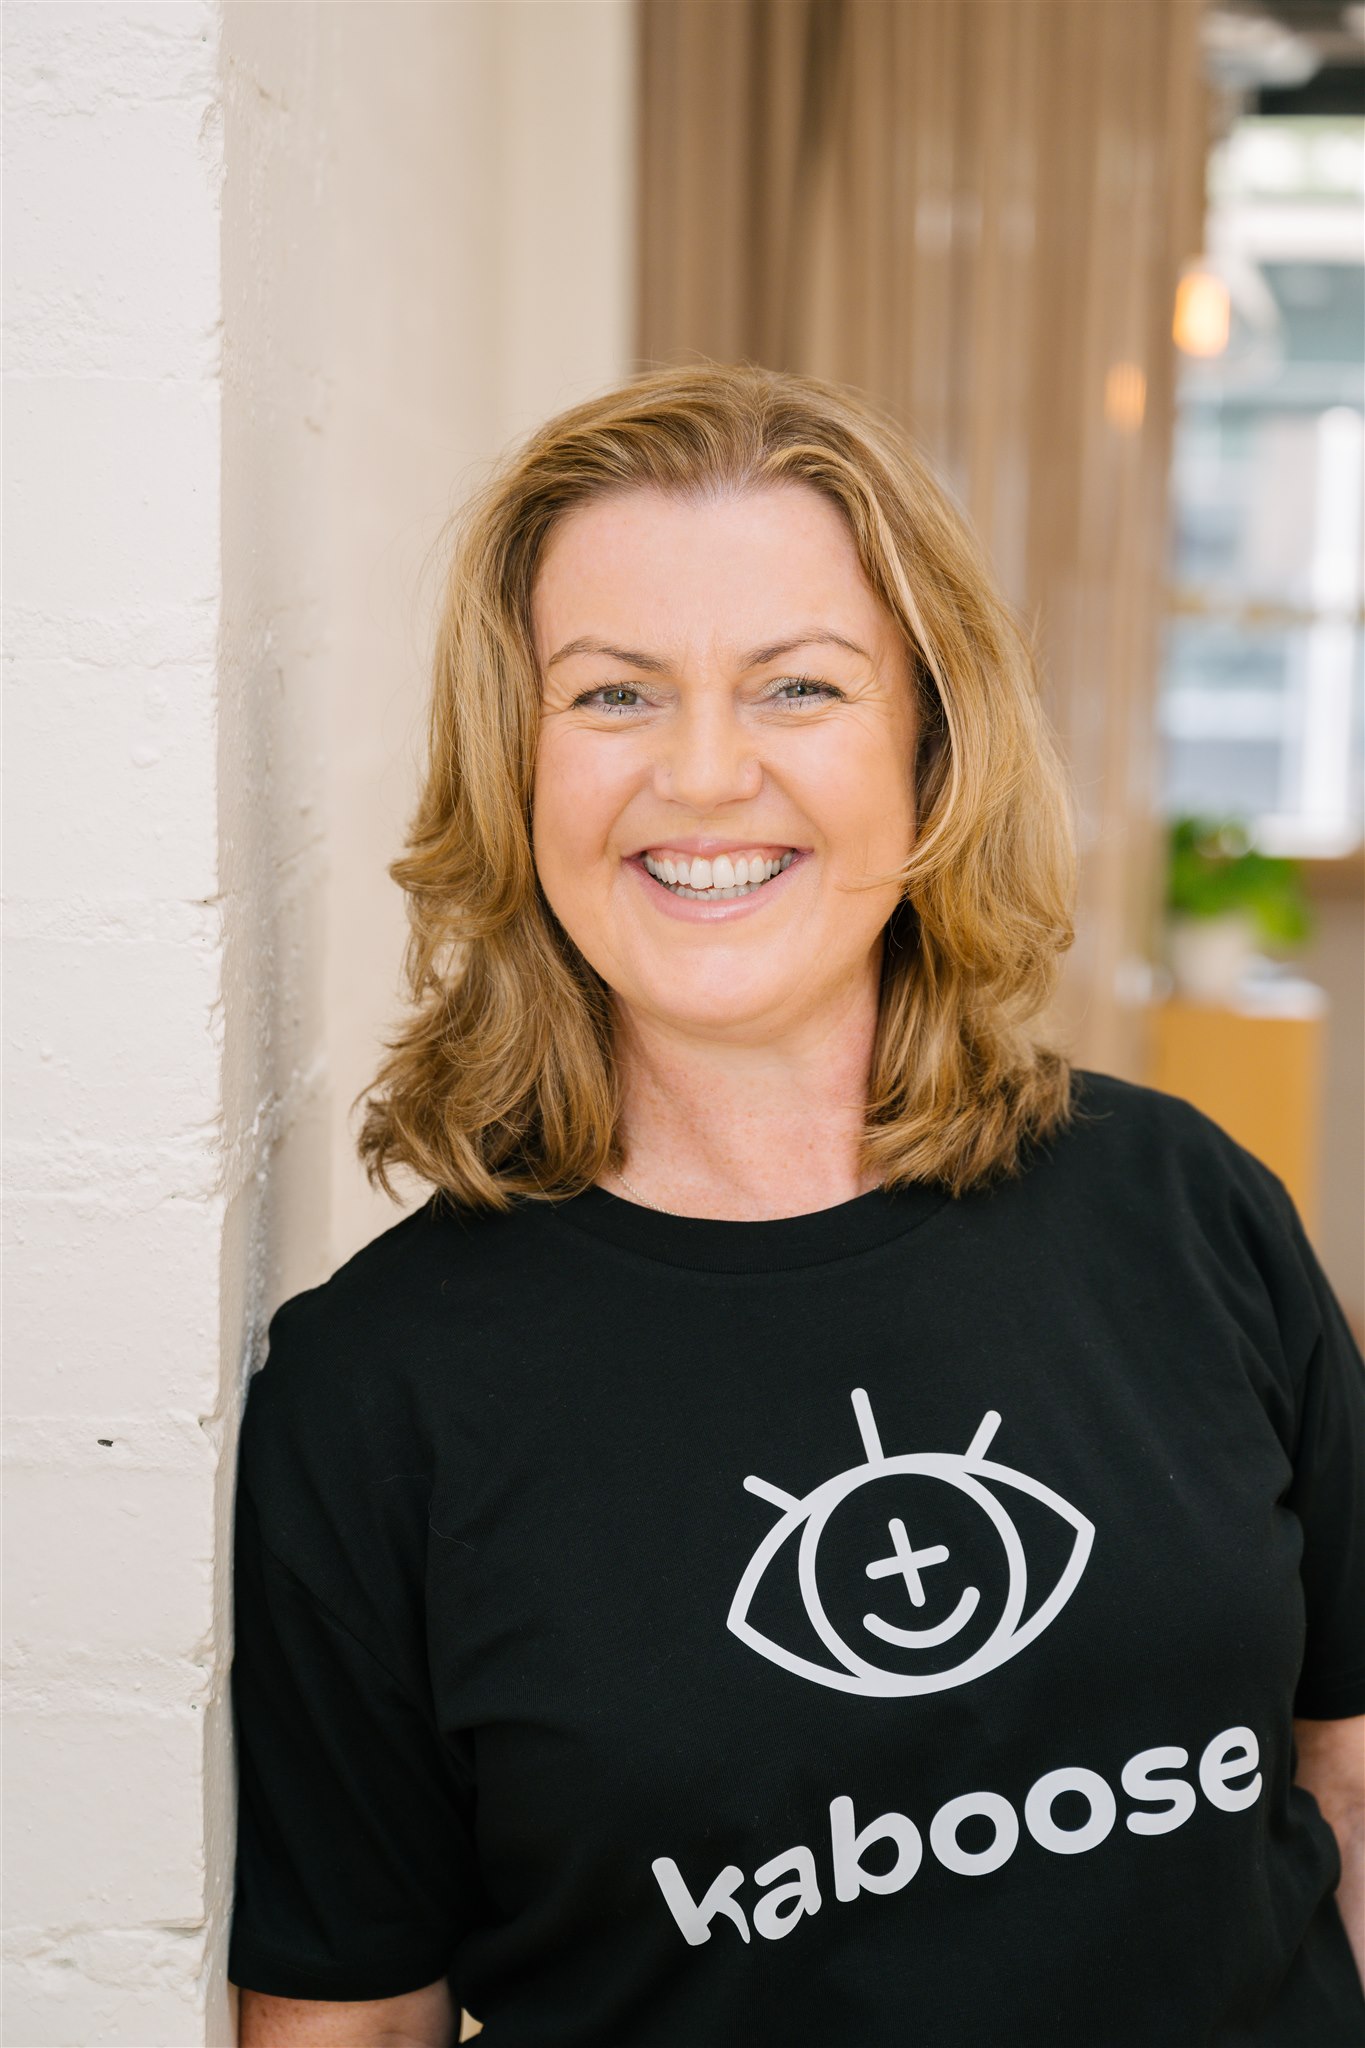 Michelle Risdale - Founder of Kaboose